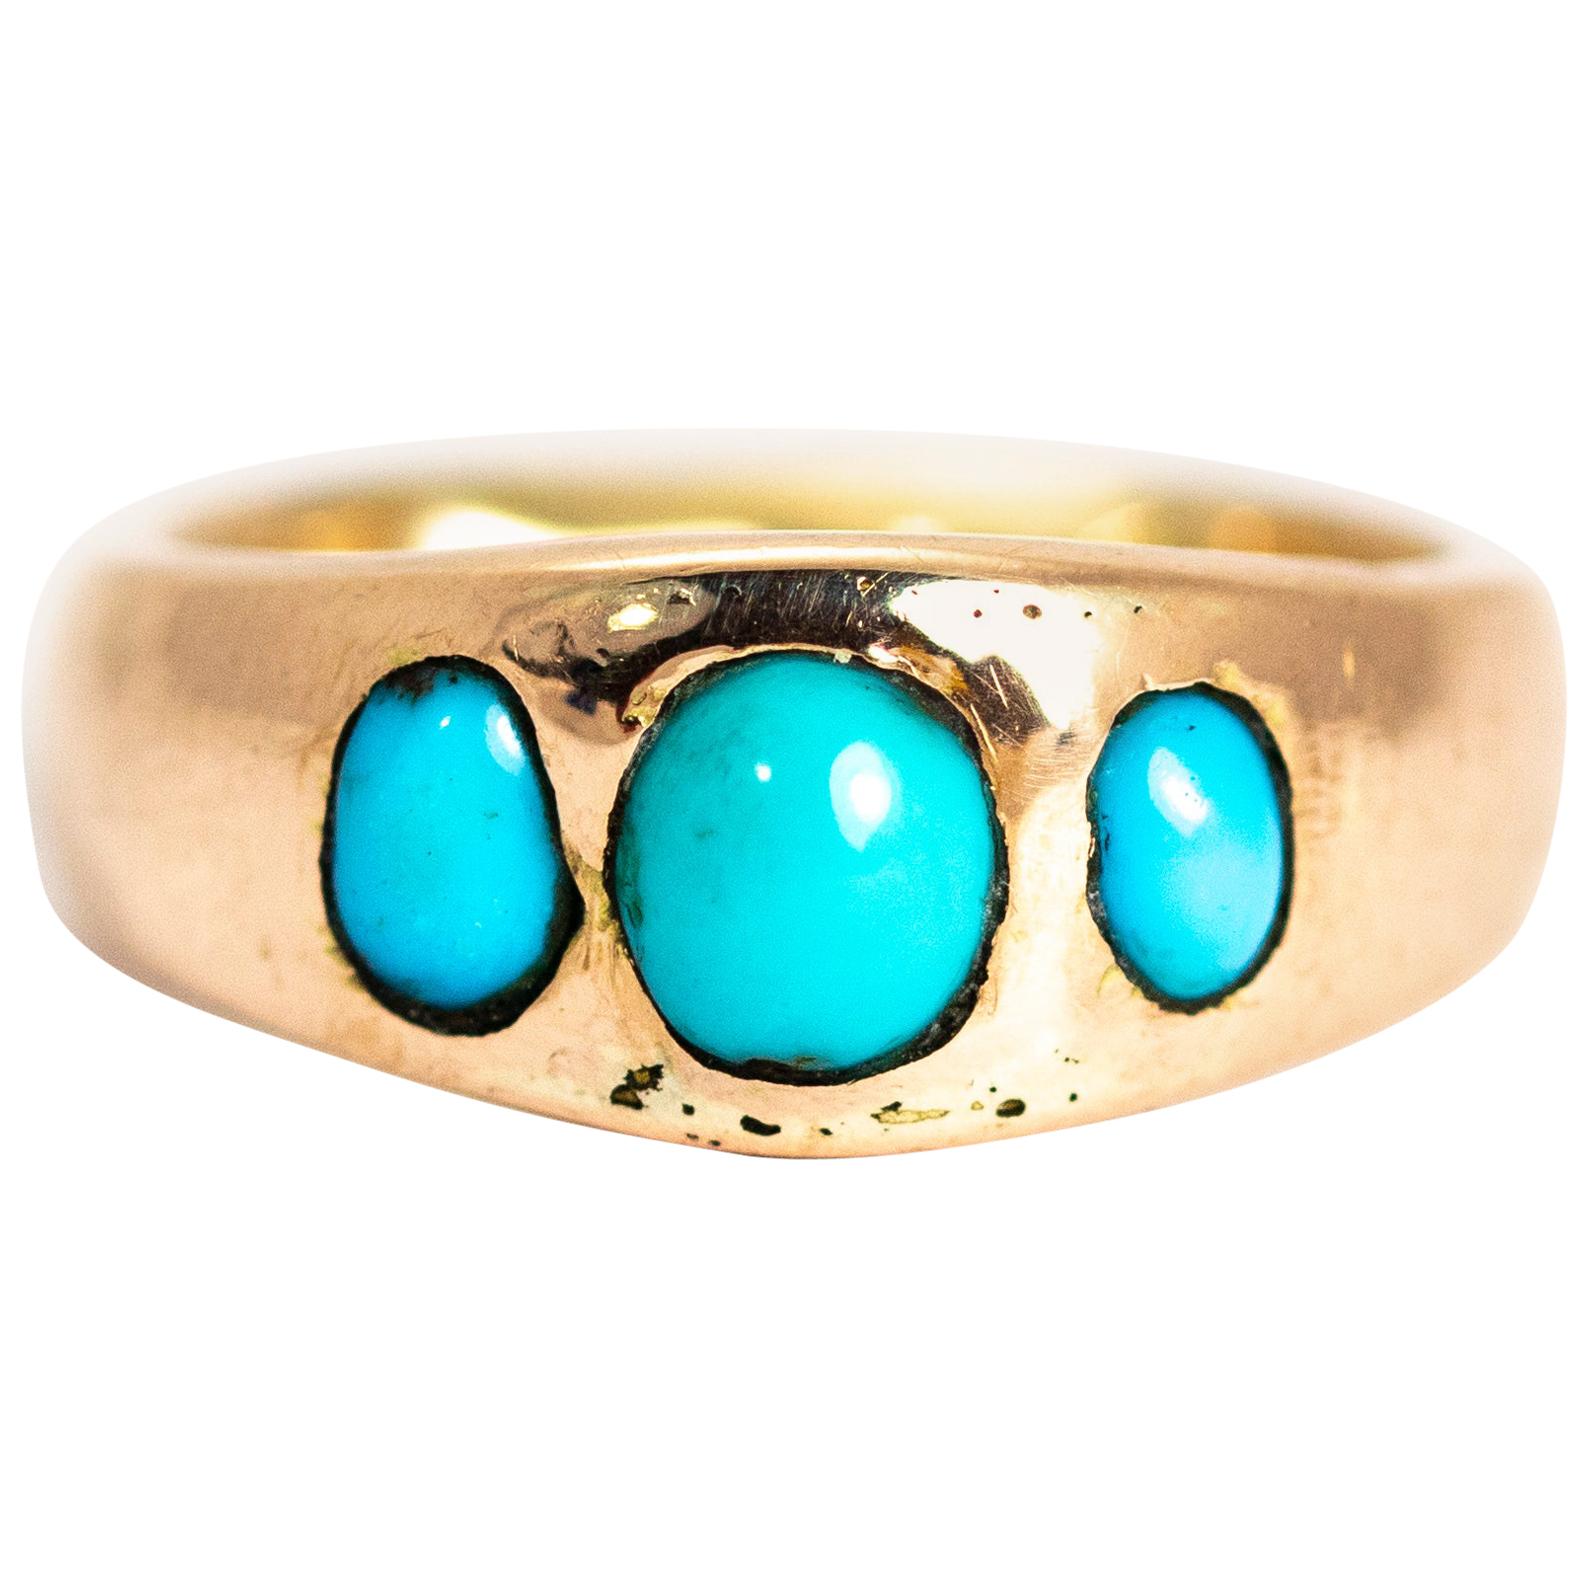 Vintage Turquoise Cabochon and 9 Carat Gold Band